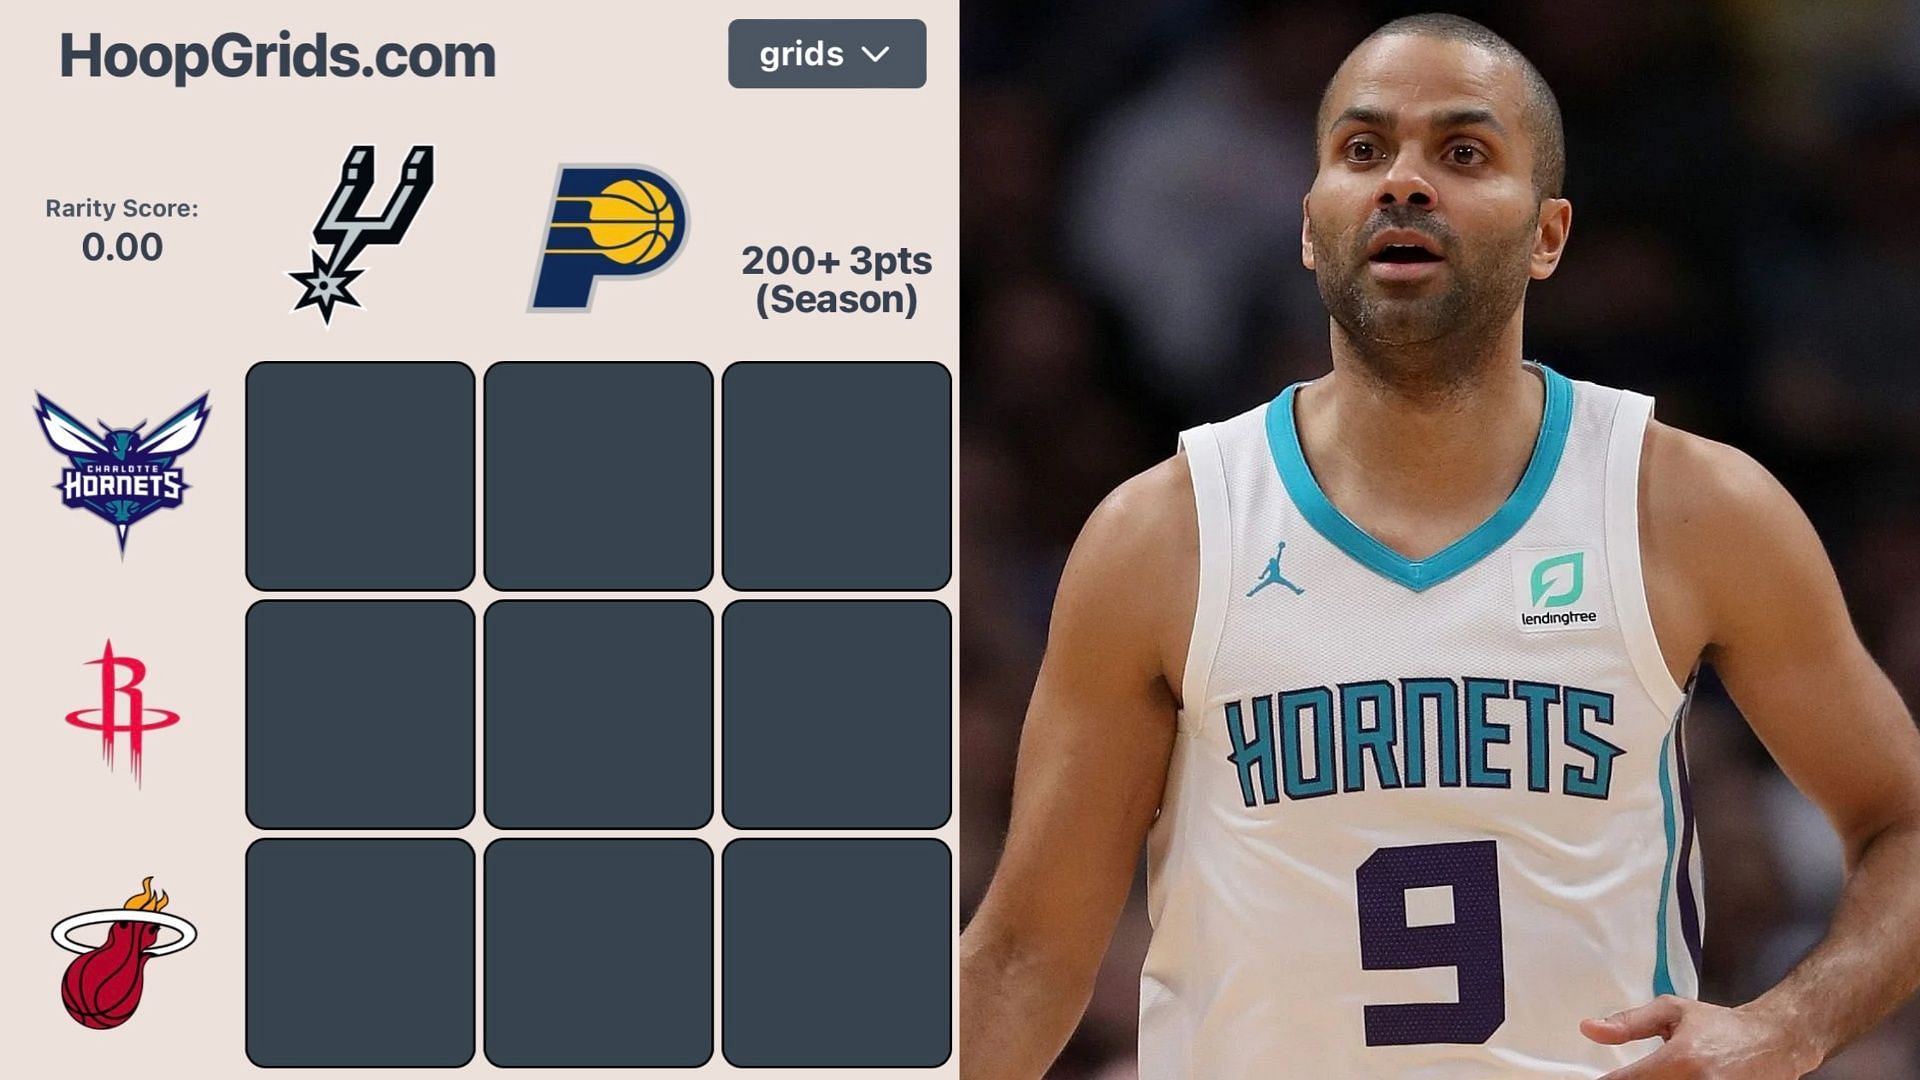 Tony Parker in a Hornets jersey, which happened last season. : r/nba